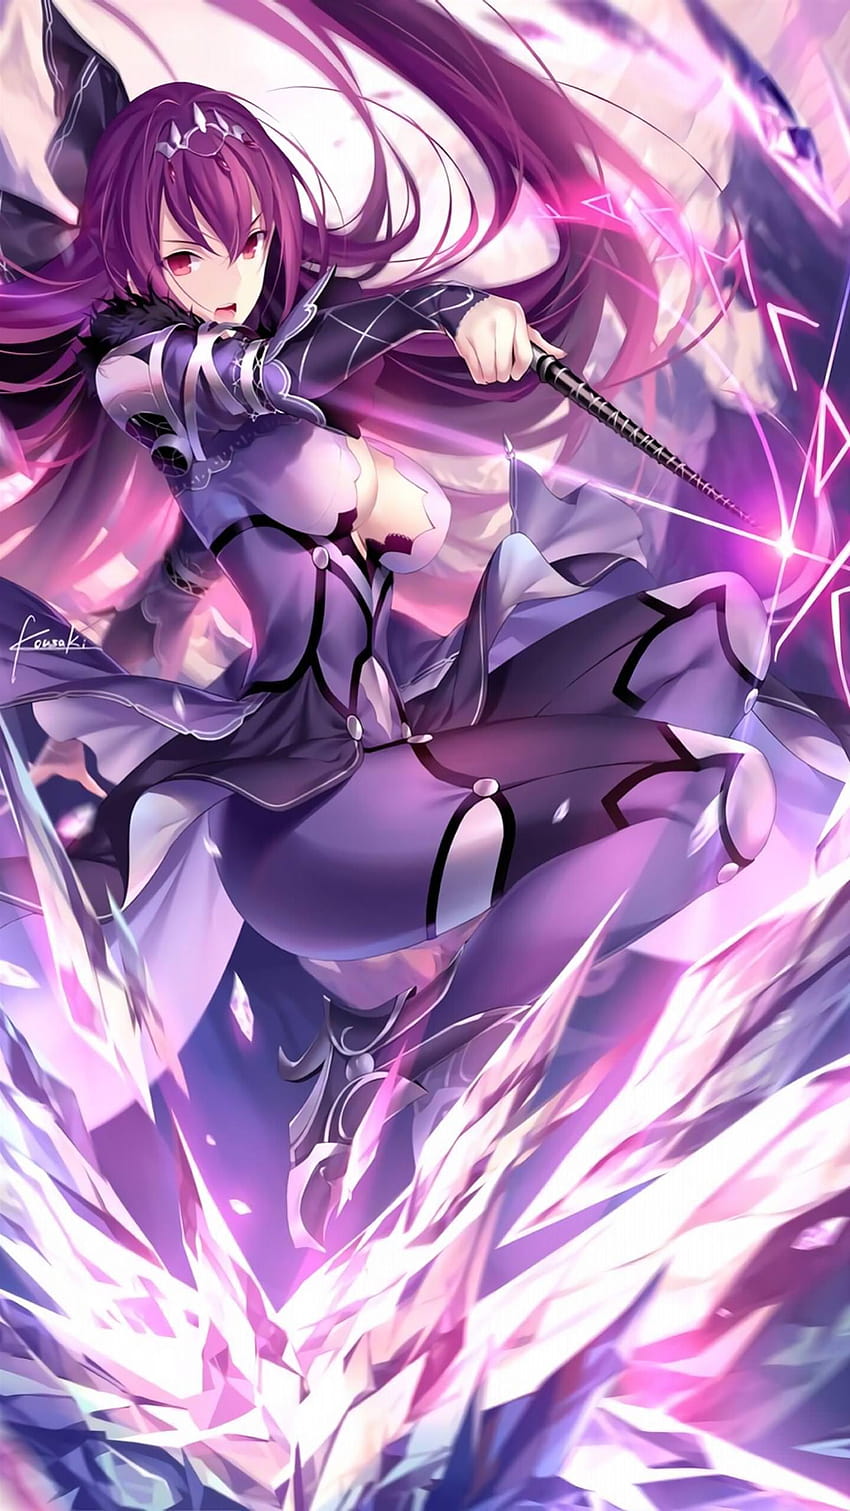 Scathach Skadi [Fate Grand Order] [1440x2560], anime cosplay 1440x2560 ...